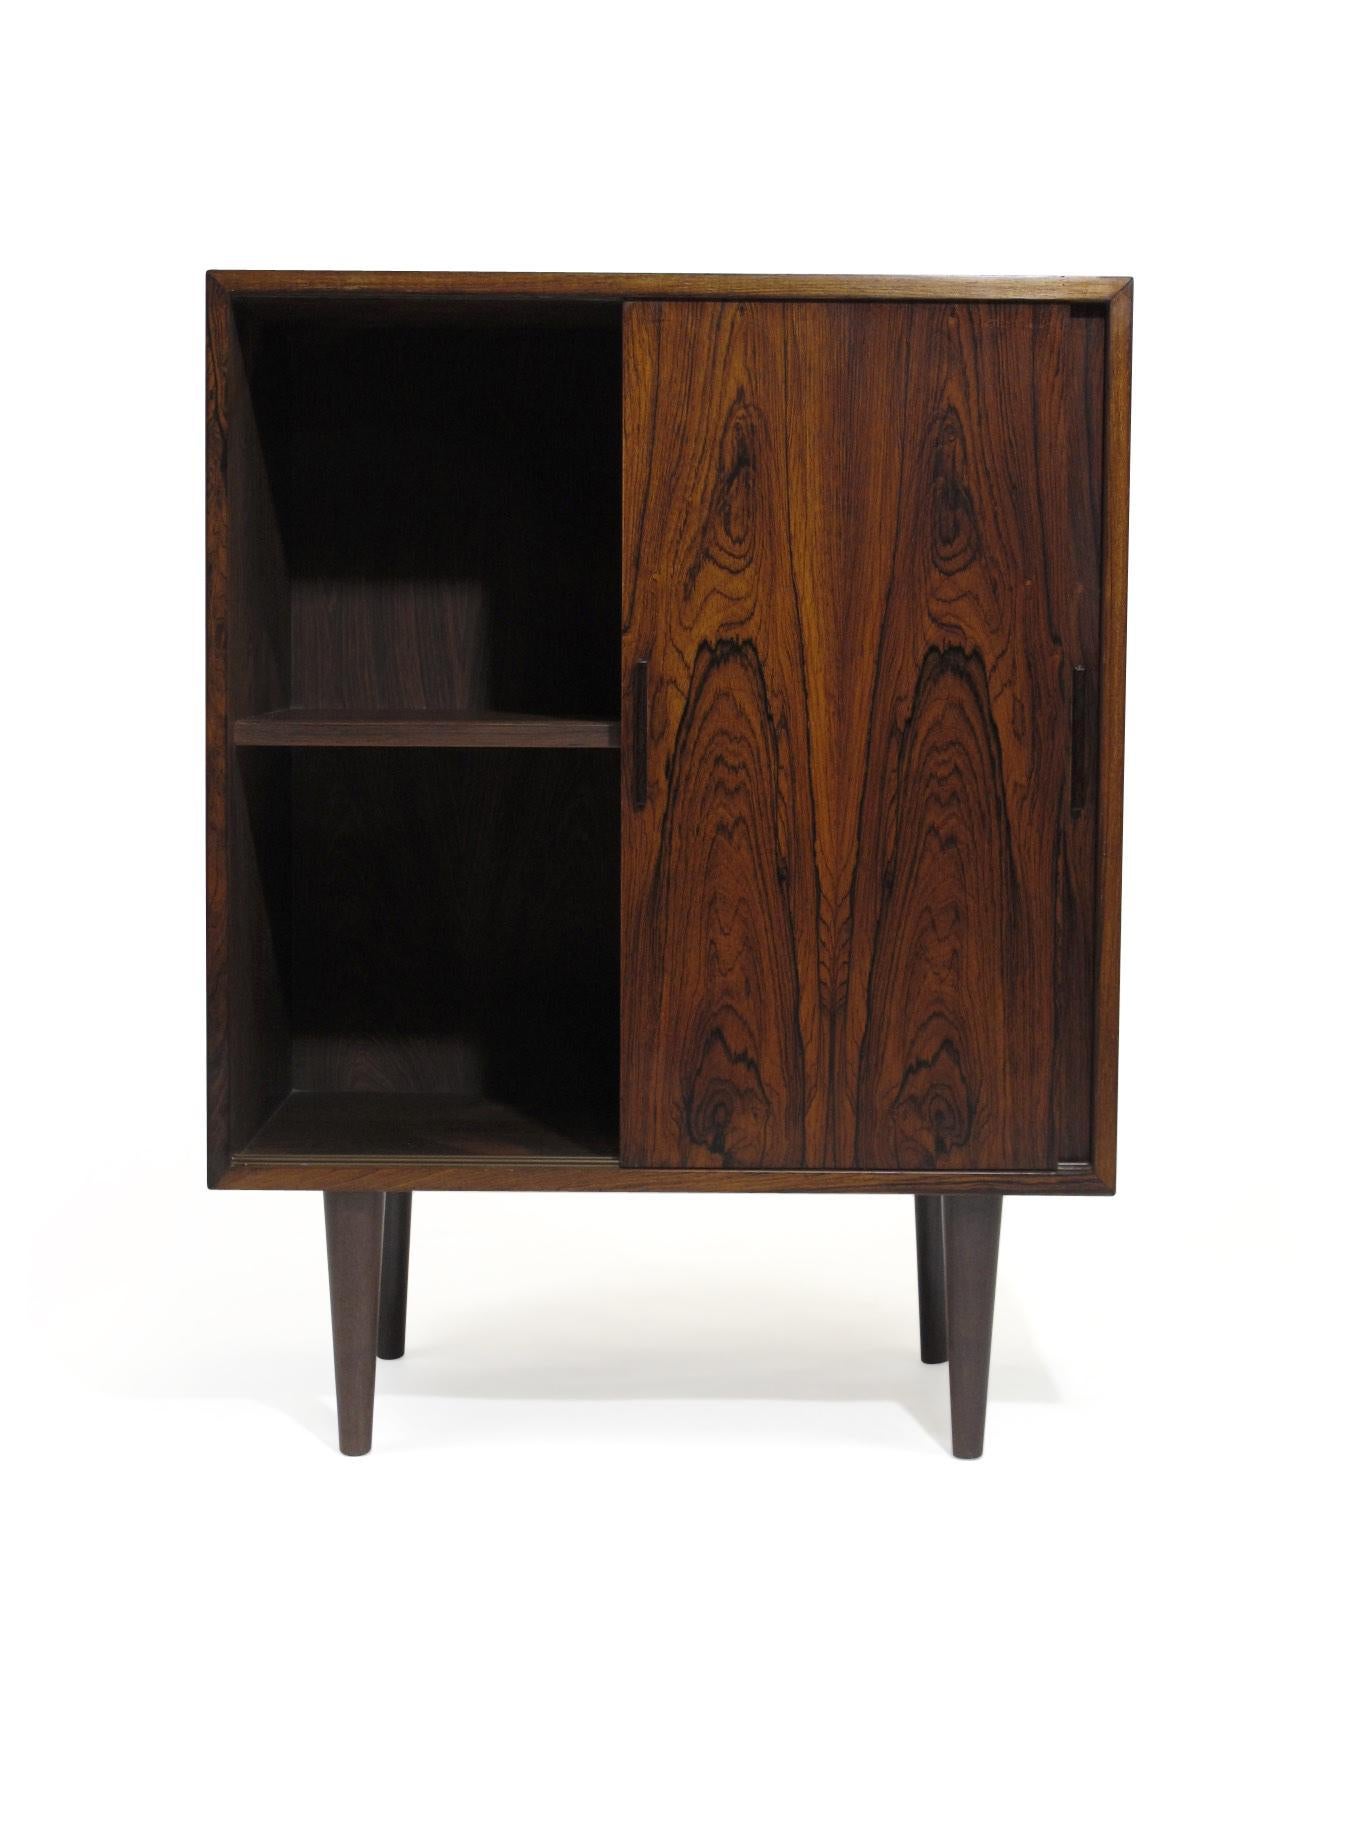 Mid Century Danish Modern Rosewood cabinet of dark book-matched rosewood with mitered edges, two sliding doors with interior lined with rosewood and interior shelf, raised on tapered legs. Cabinet can be use as entry way cabinet, media cabinet or